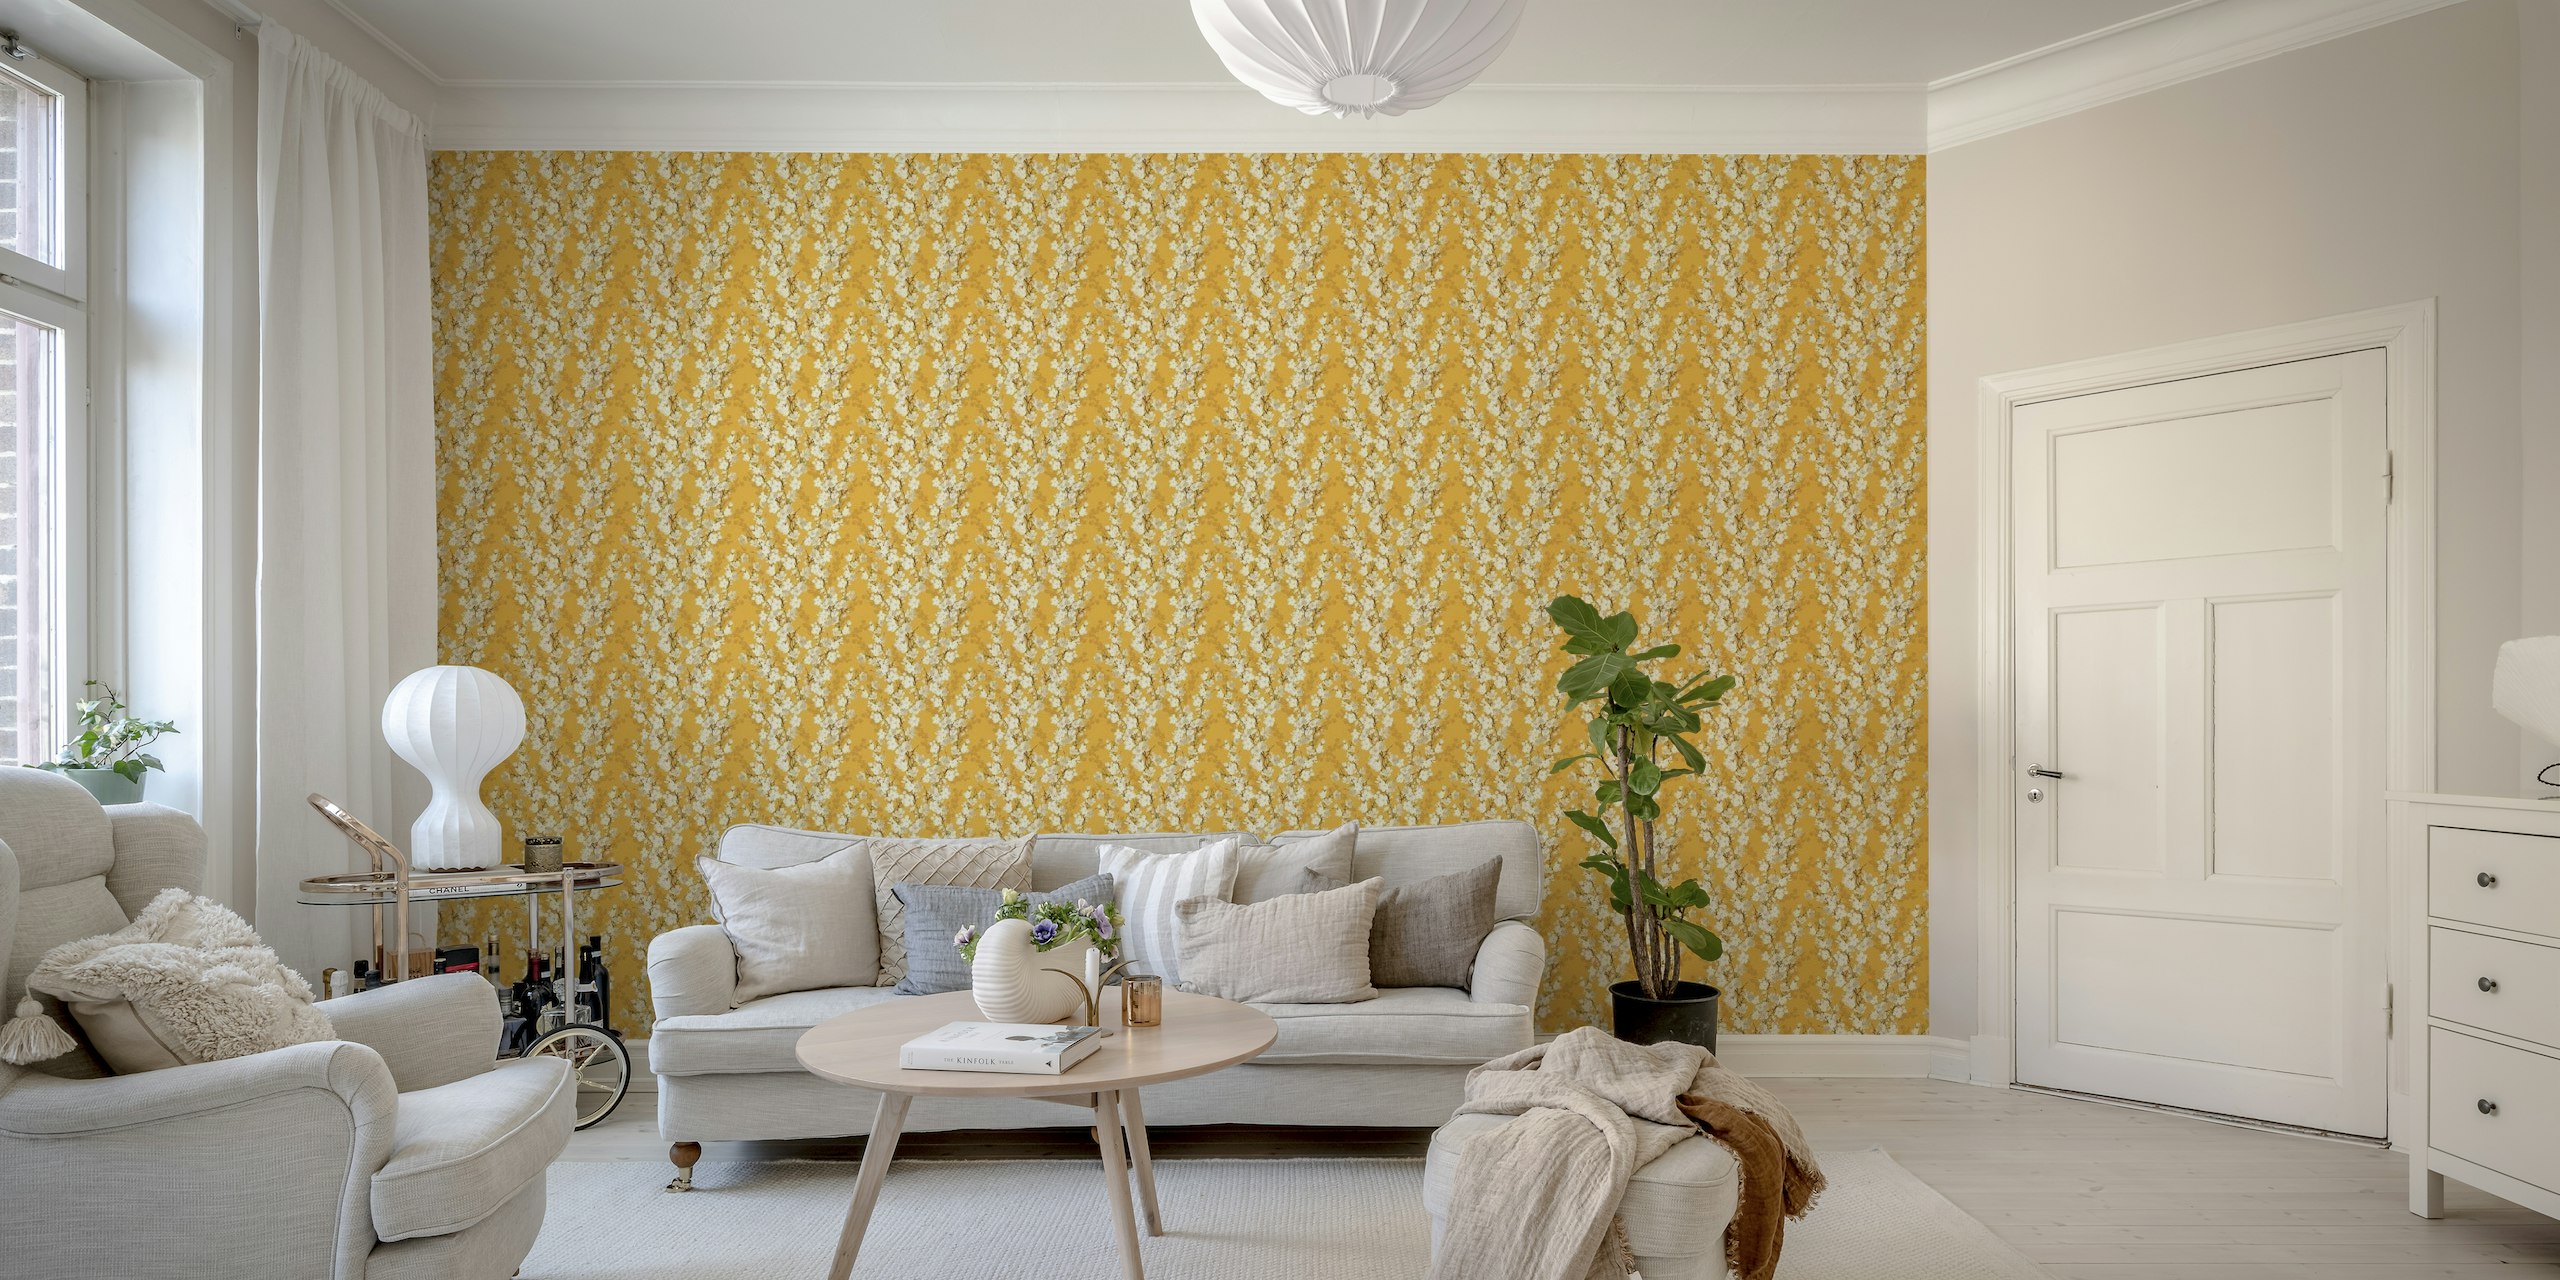 Cherry blossom indian yellow large scale wallpaper